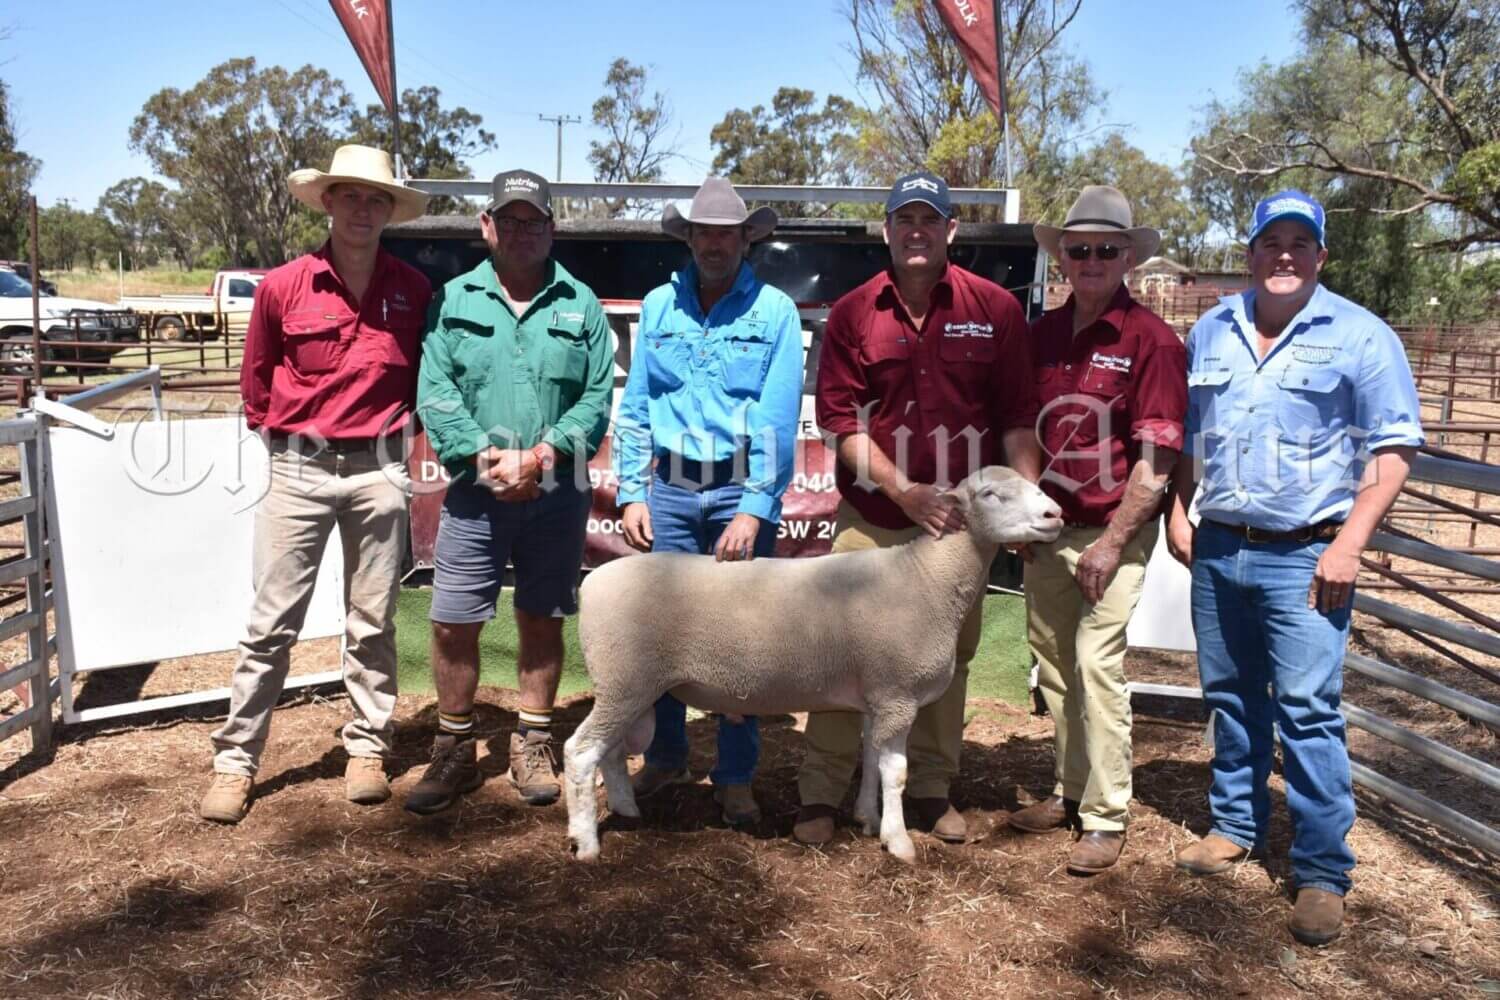 Jack Piercy (Forbes Livestock), Matt Coady (Nutrien), Dustin Kemp (Duxton Broad Acre Farms), Scott Mitchell (RENE STUD), Doug Mitchell (RENE STUD) and Brendon White of Kevin Miller, Whitty, Lennon and Co (KMWL) with Lot 1, who was the top priced ram. RENE STUD held a very successful White Suffolk and Poll Dorset Flock Ram Sale at Condobolin Saleyards on Thursday, 8 December. Image Credit: Melissa Blewitt.